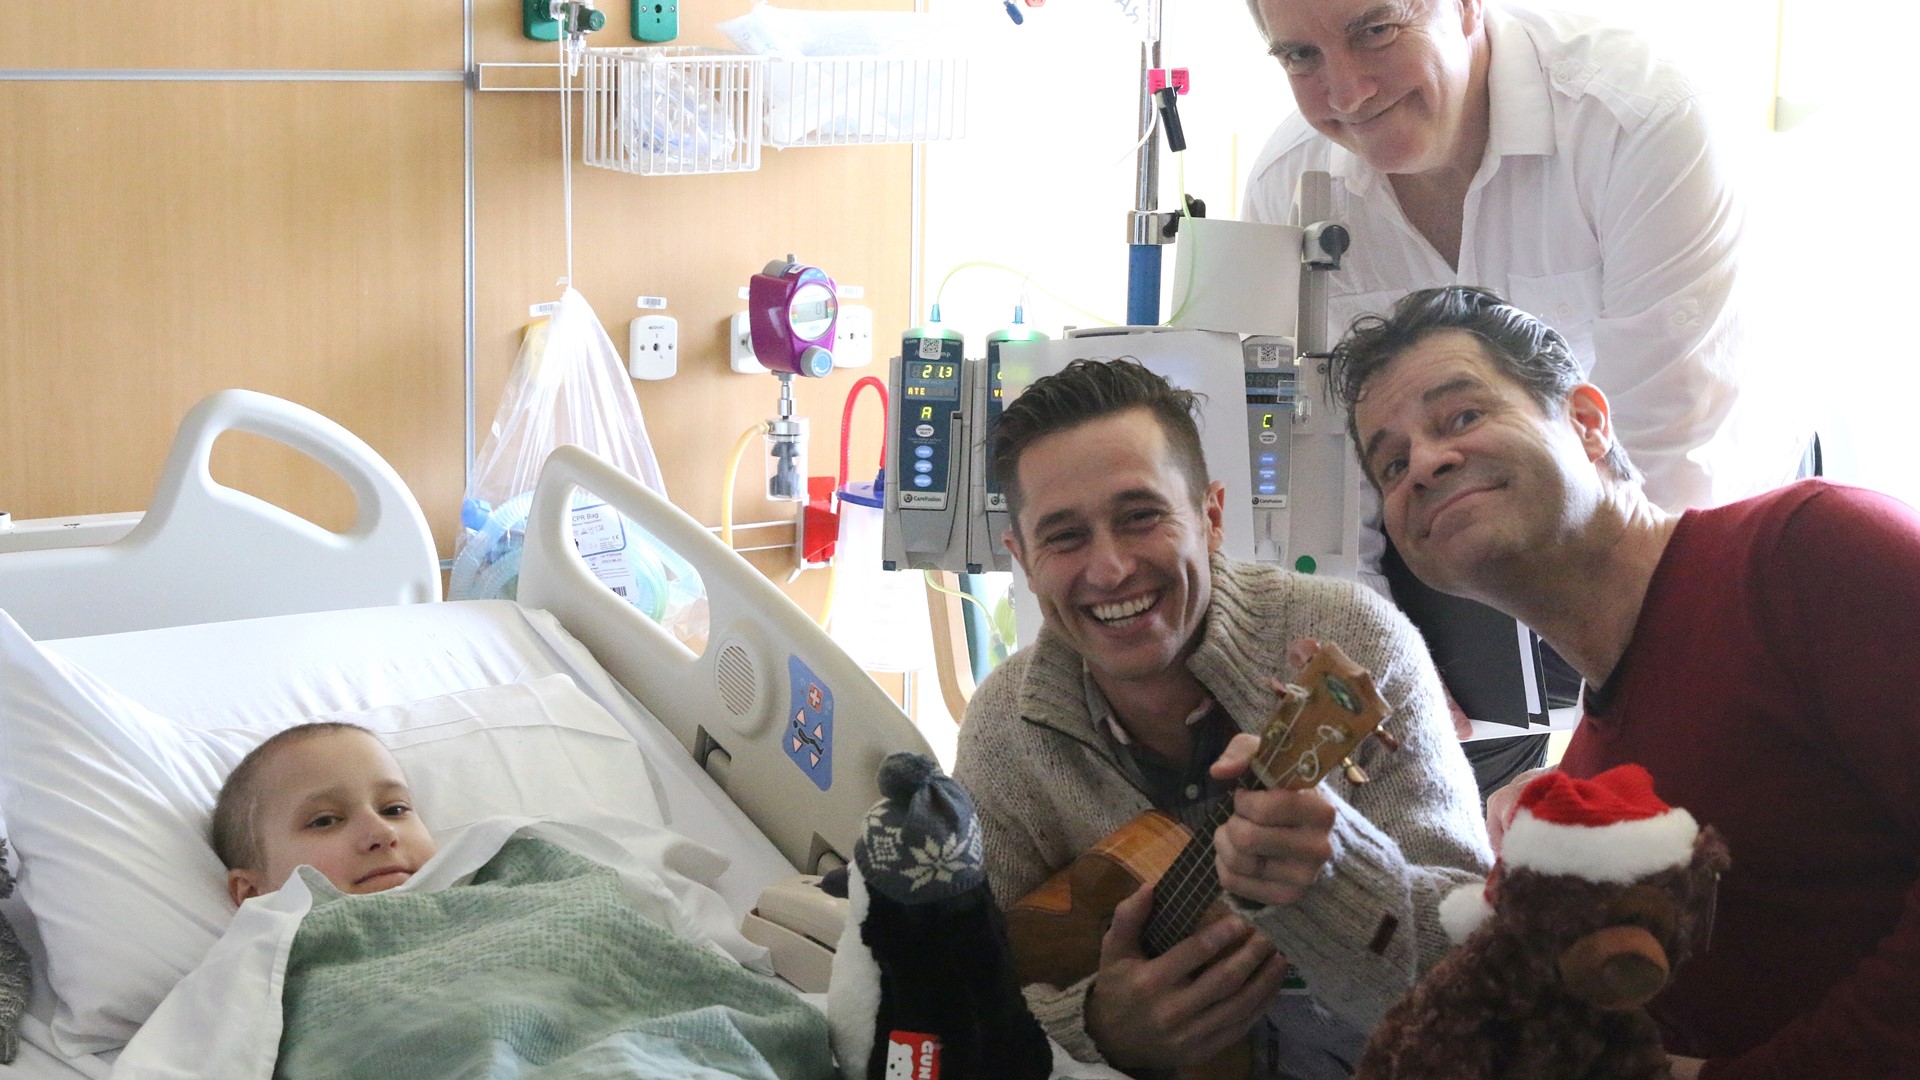 The Melodic Caring Project brings joy to the lives of hospitalized children by live-streaming performances directly to the child's hospital room or home care facility in partnerships with celebrities and the hospitals. This segment is sponsored by Premera Blue Cross.